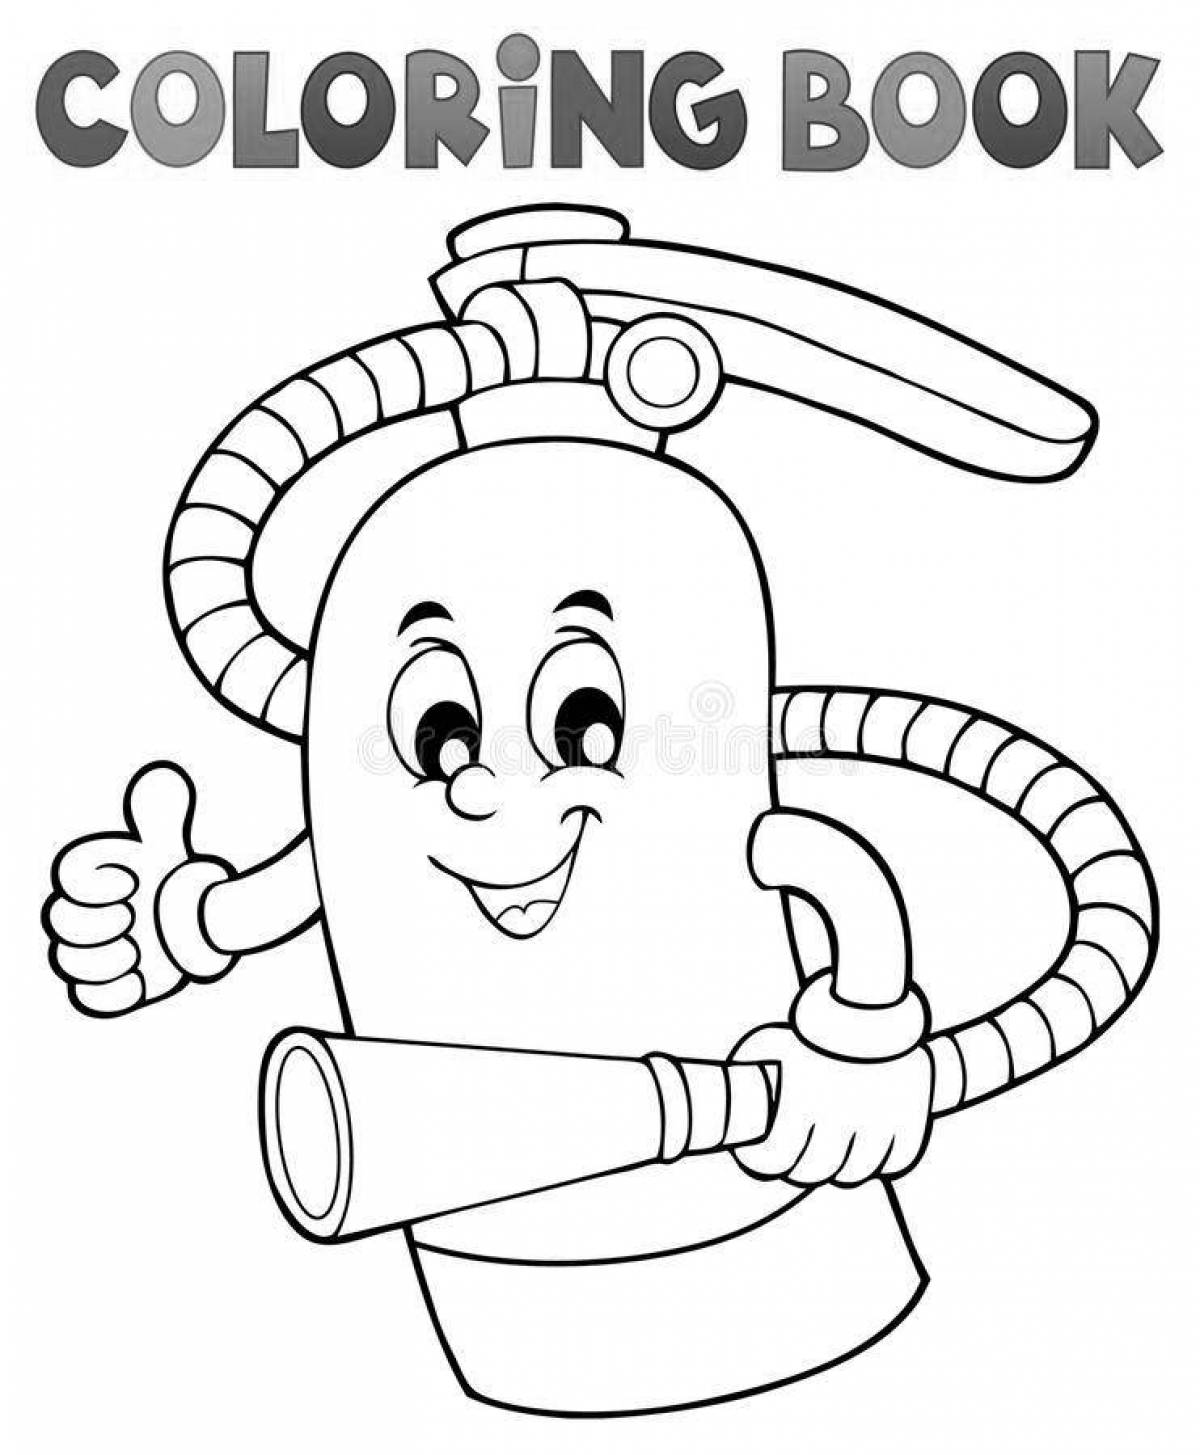 Fire extinguisher coloring page